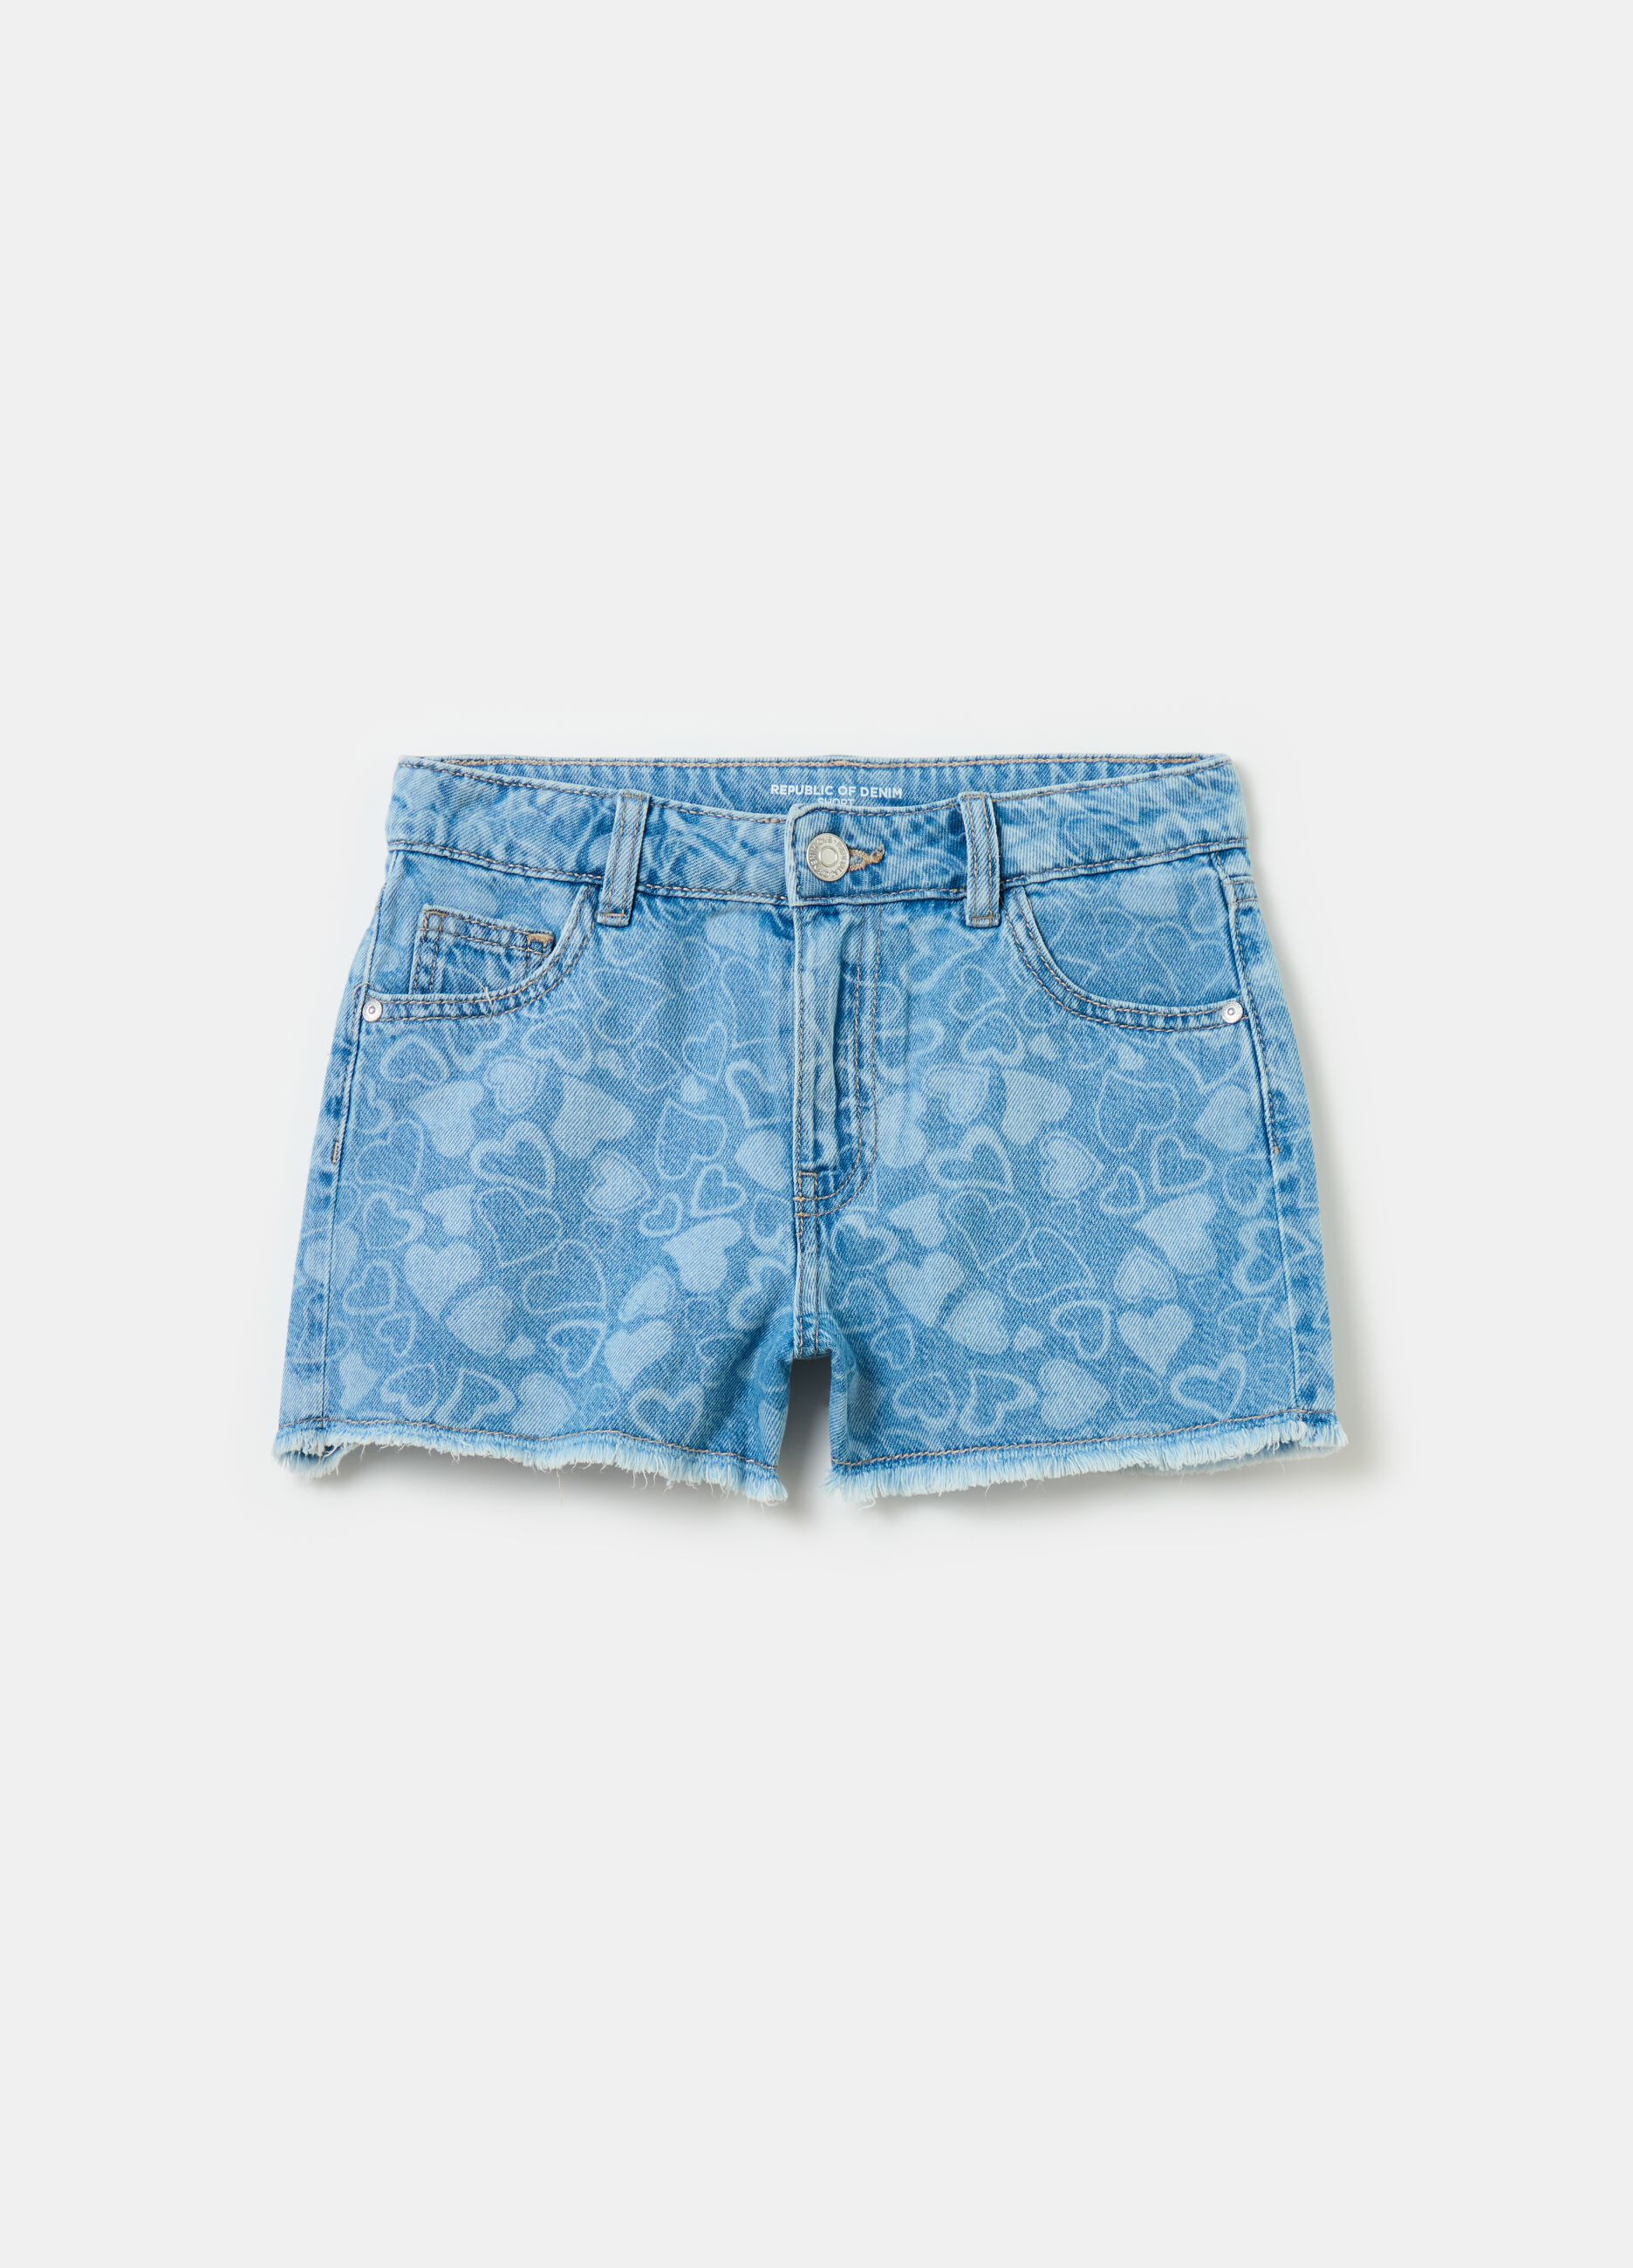 Denim shorts with all-over hearts print